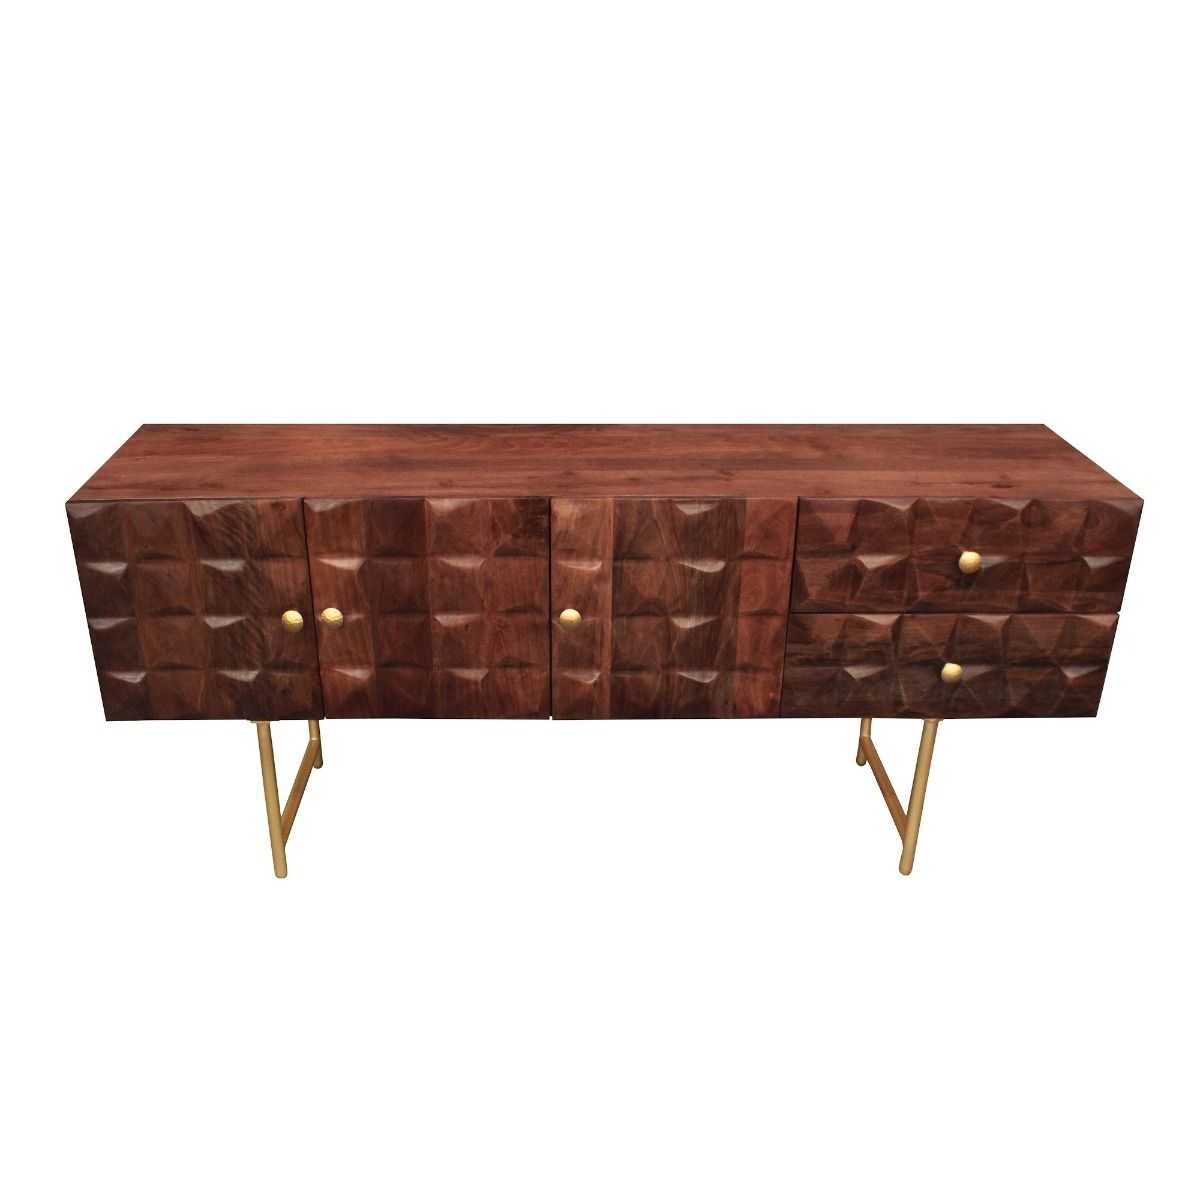 CR Kovalam Solid Timber Console Table with 3 Doors and 2 Drawers